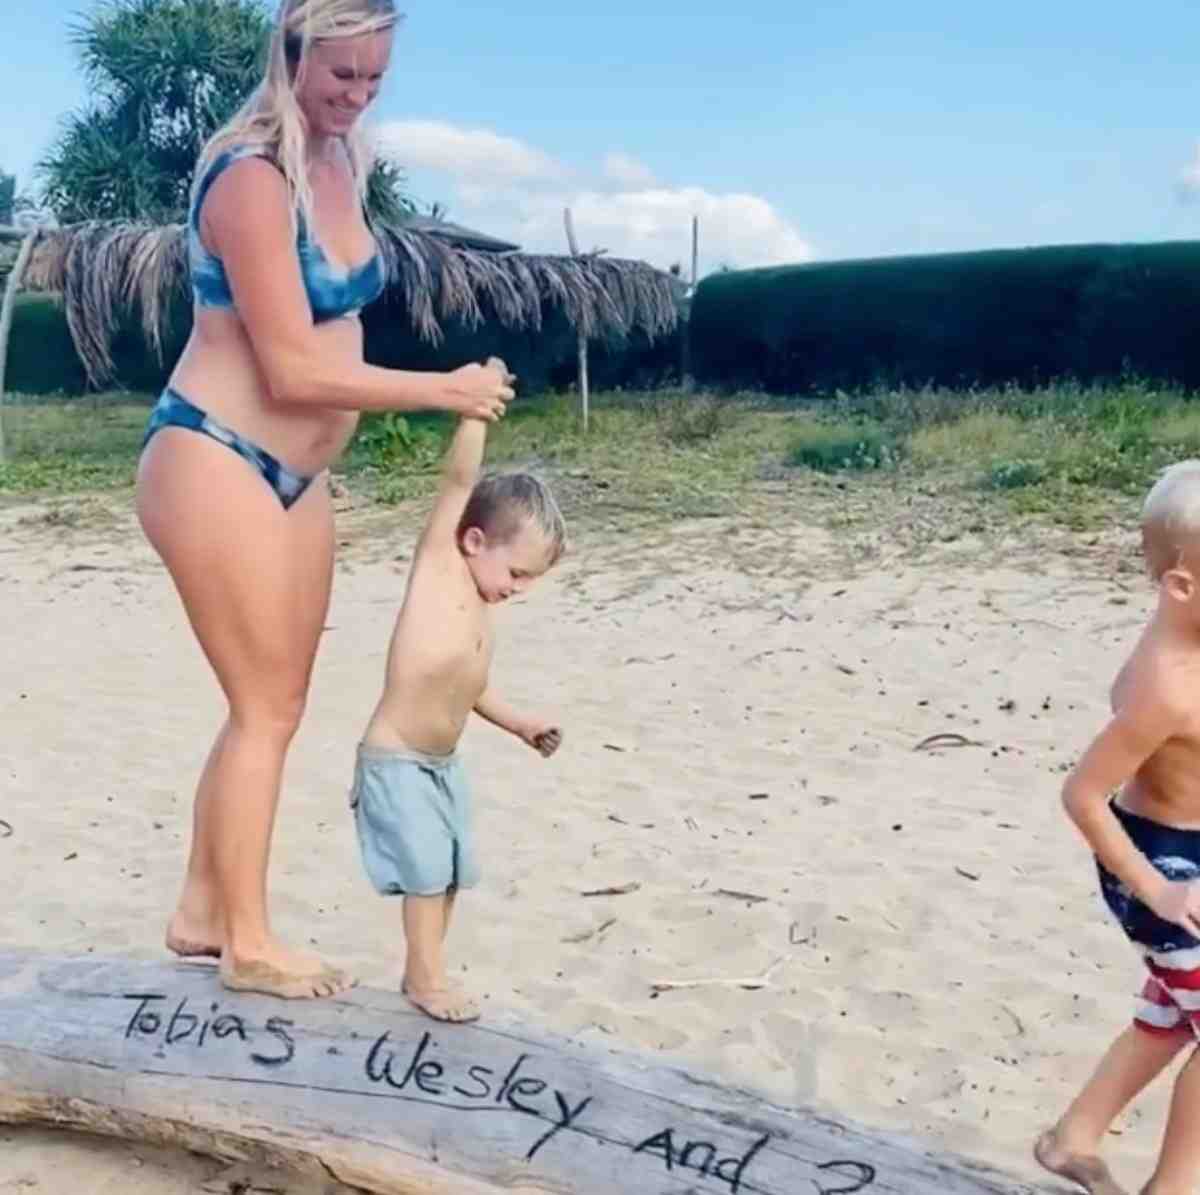 When did Bethany Hamilton have her first child?